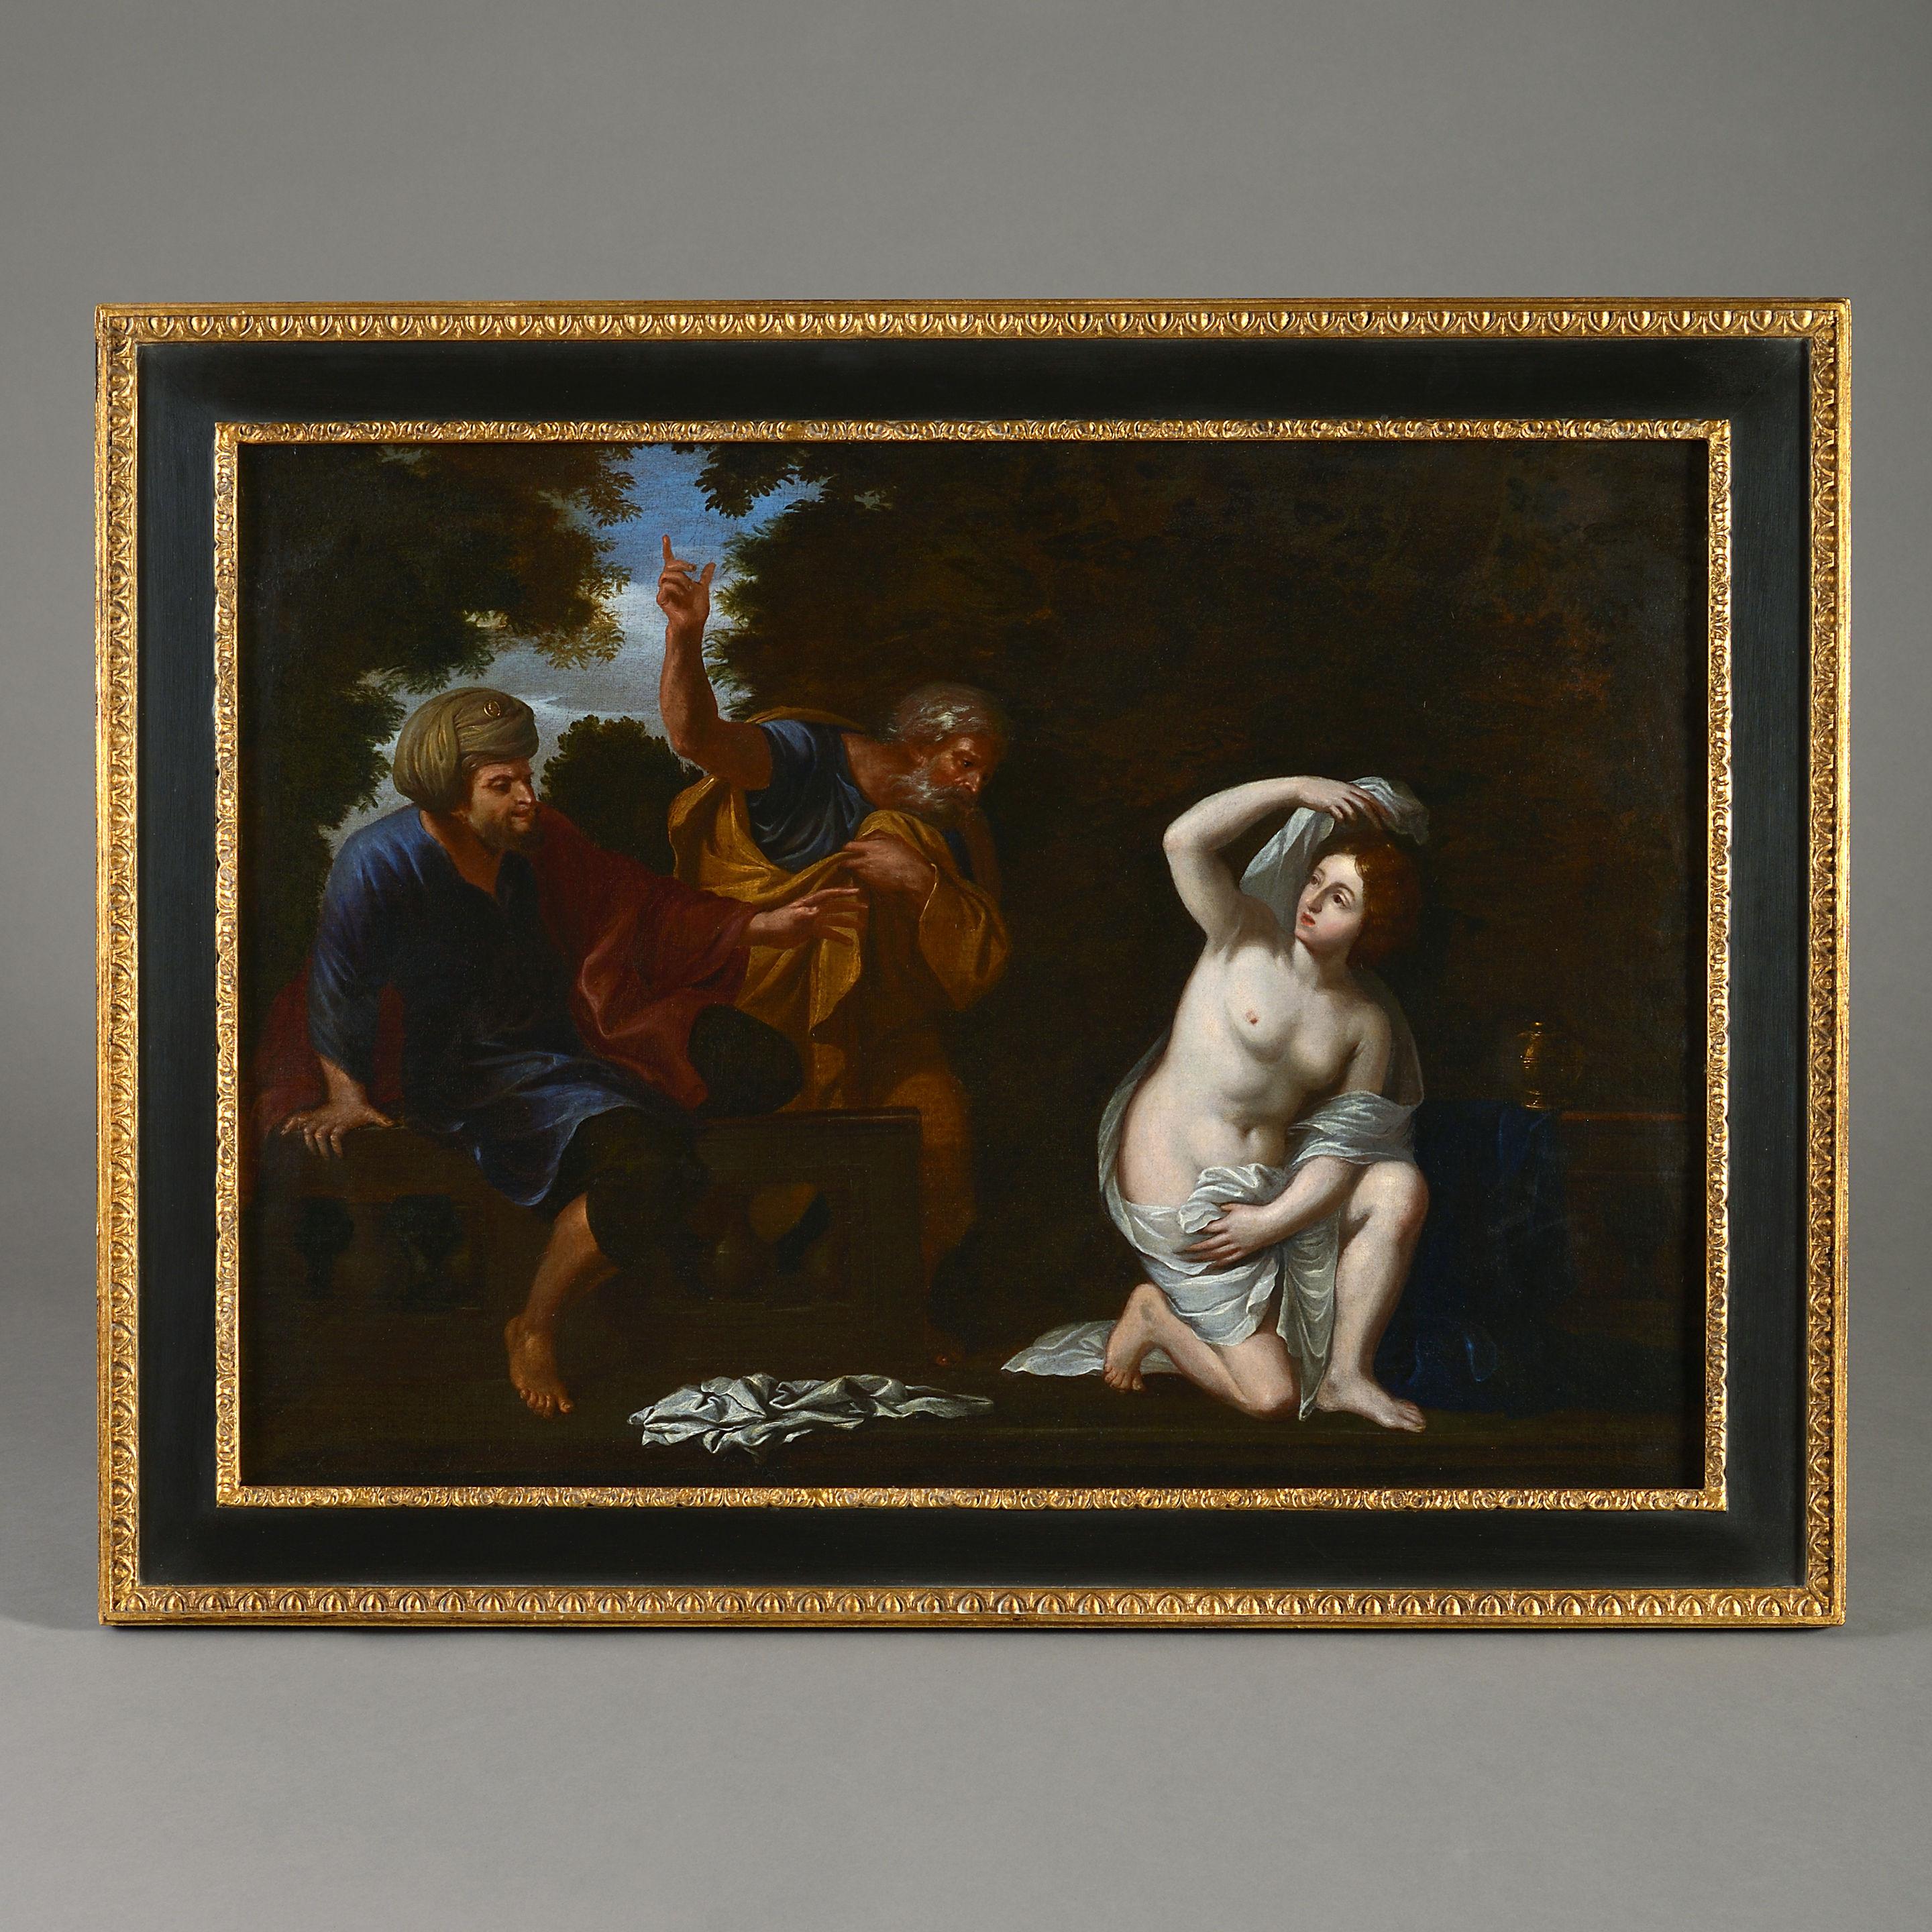 Unknown Nude Painting – 17th Century Italian School Oil - Susanna and the Elders